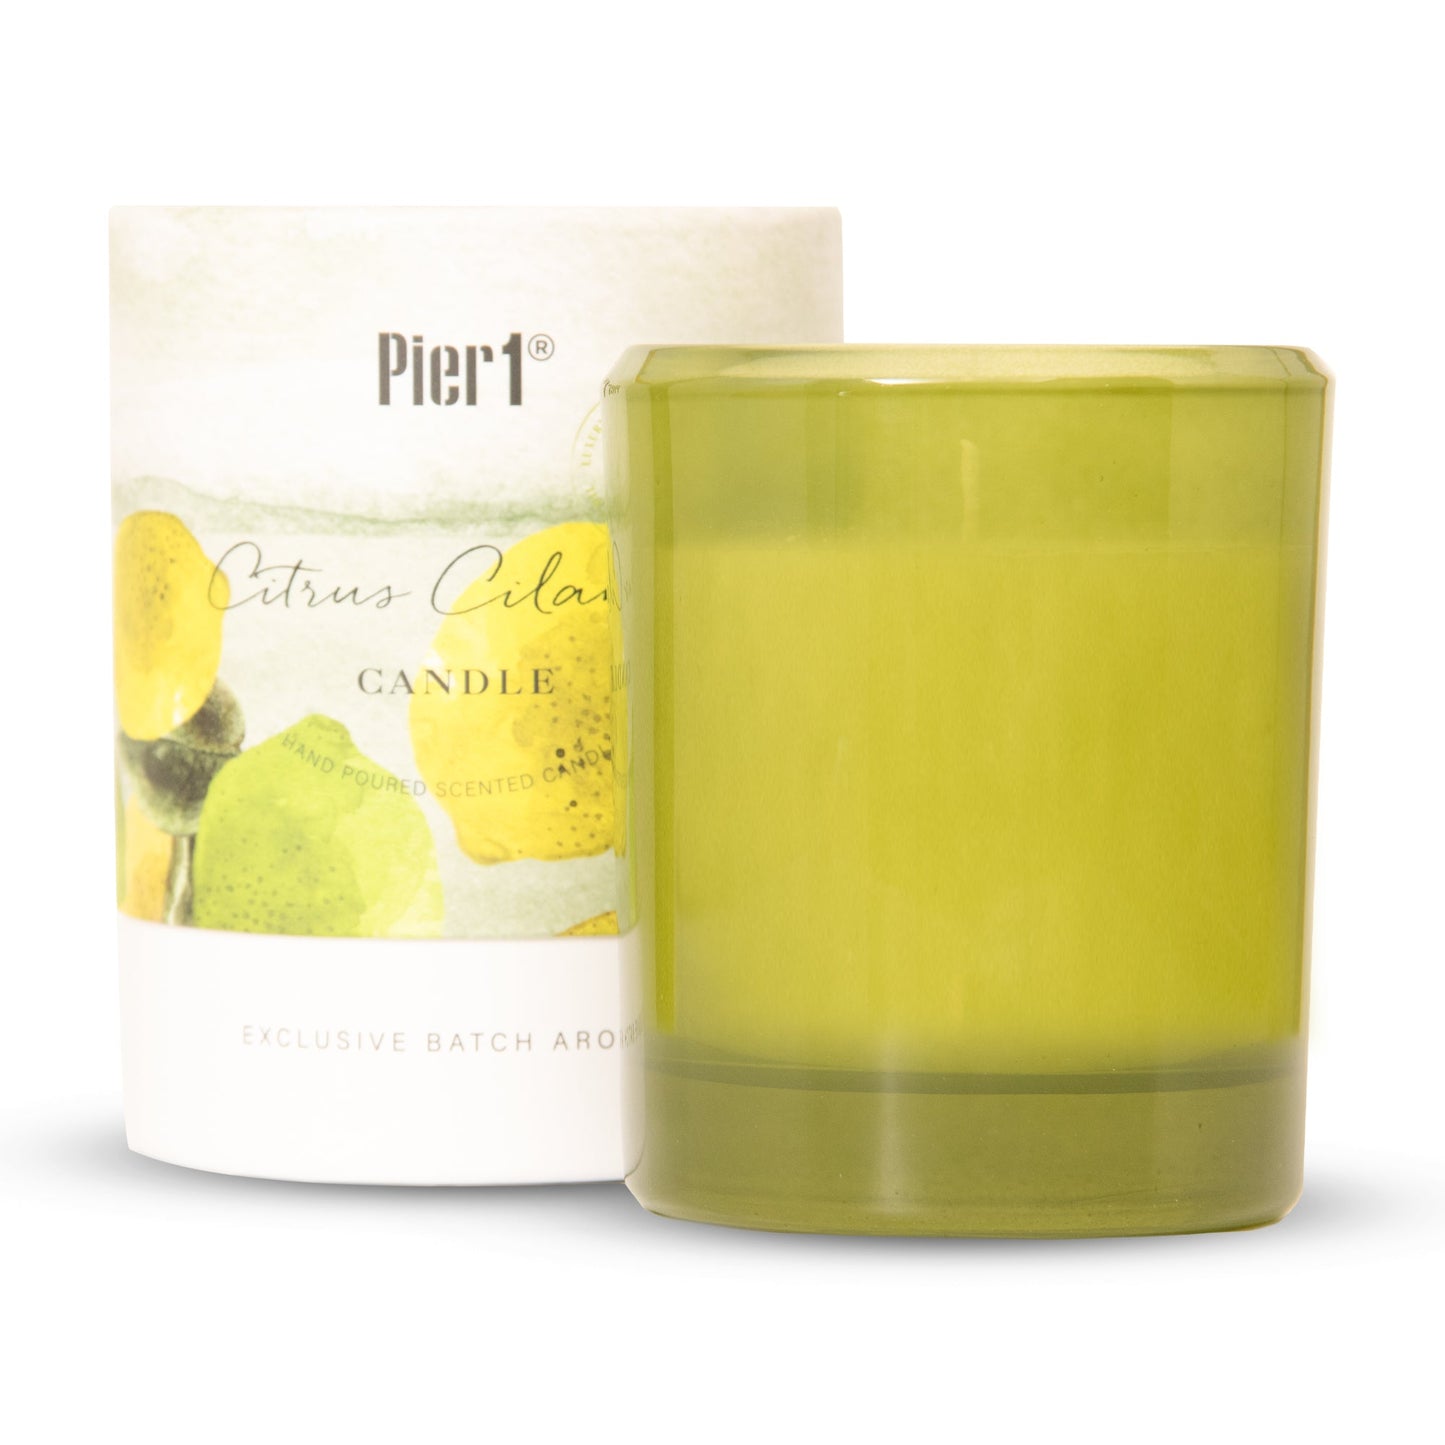 Pier 1 Citrus Cilantro 8oz Boxed Soy Candle - The Home Resolution